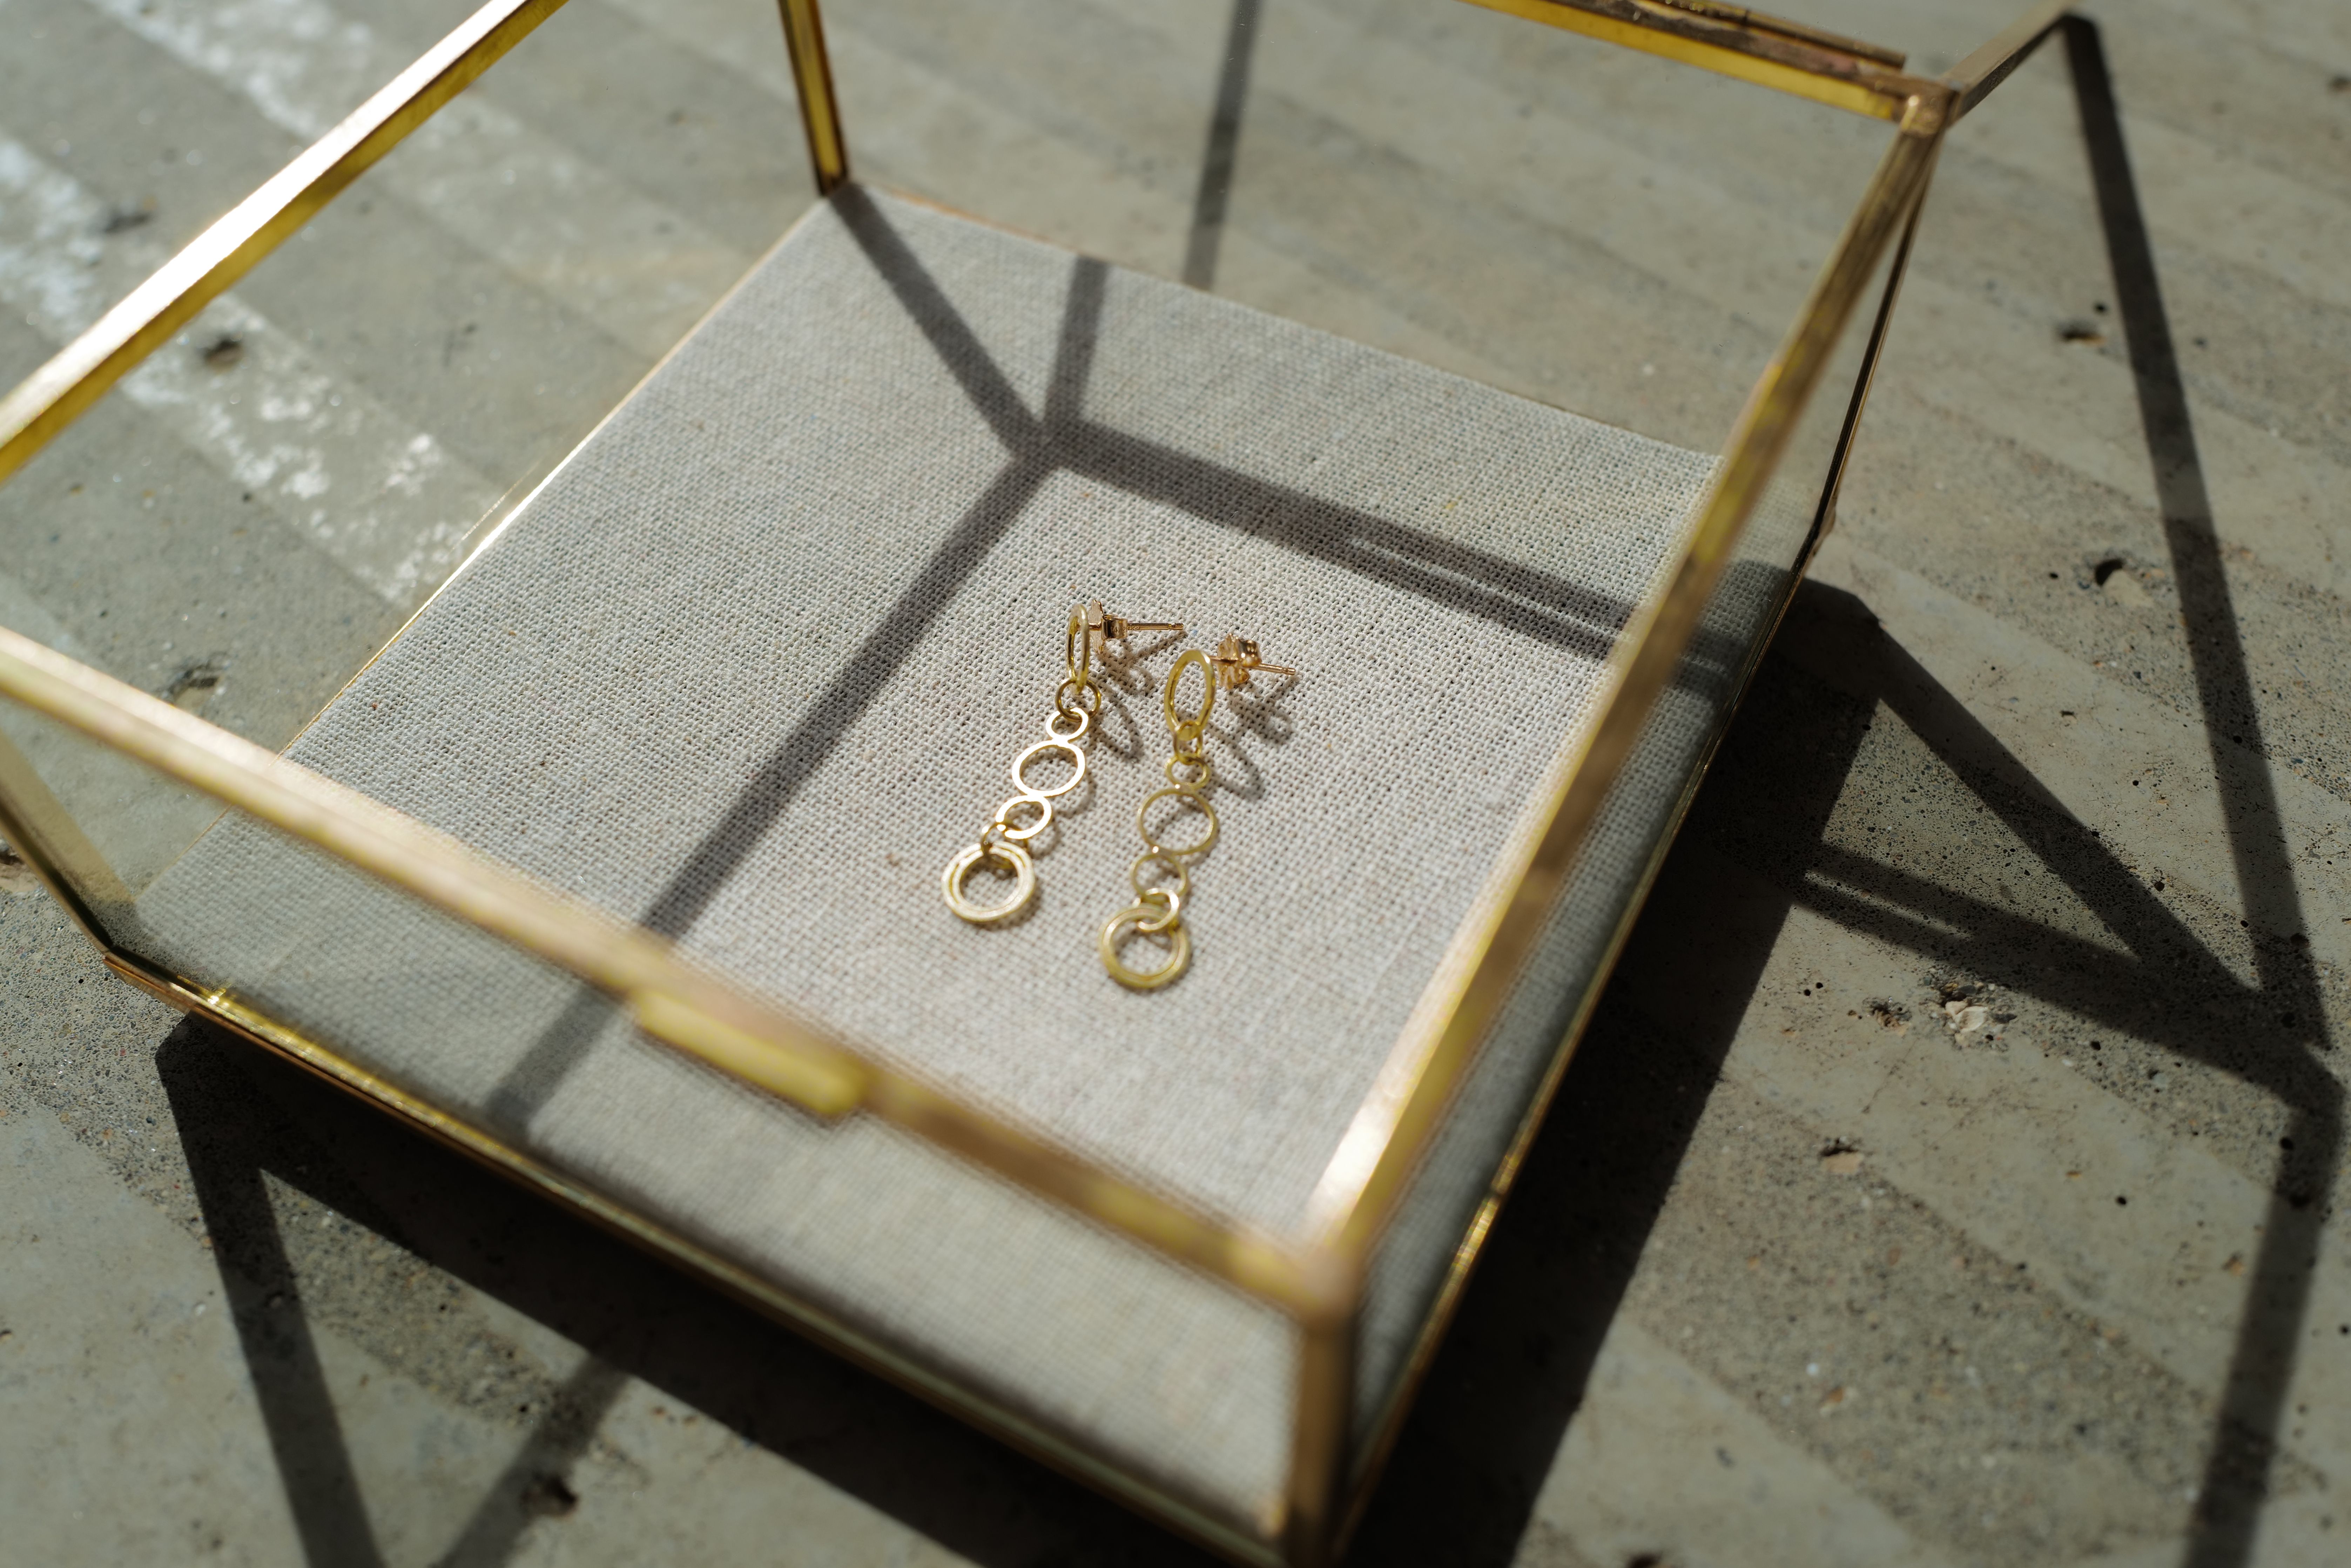 Product Image for Short Line Classico Earring